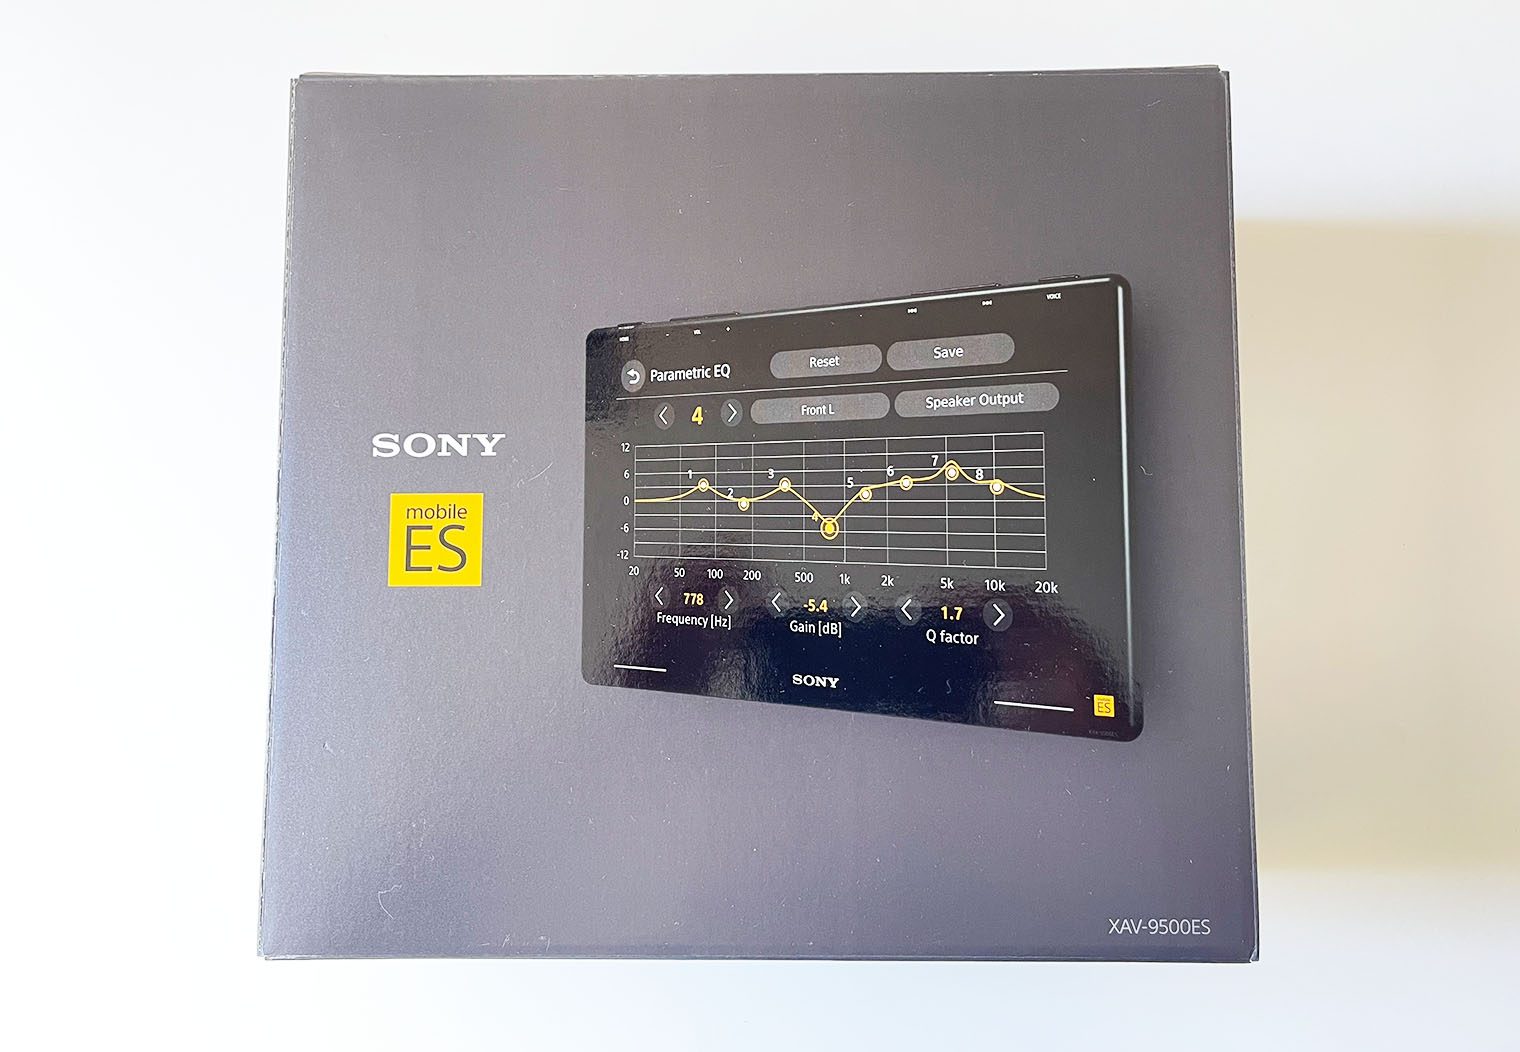 Sony XAV-9500ES front of box before opening for the first time